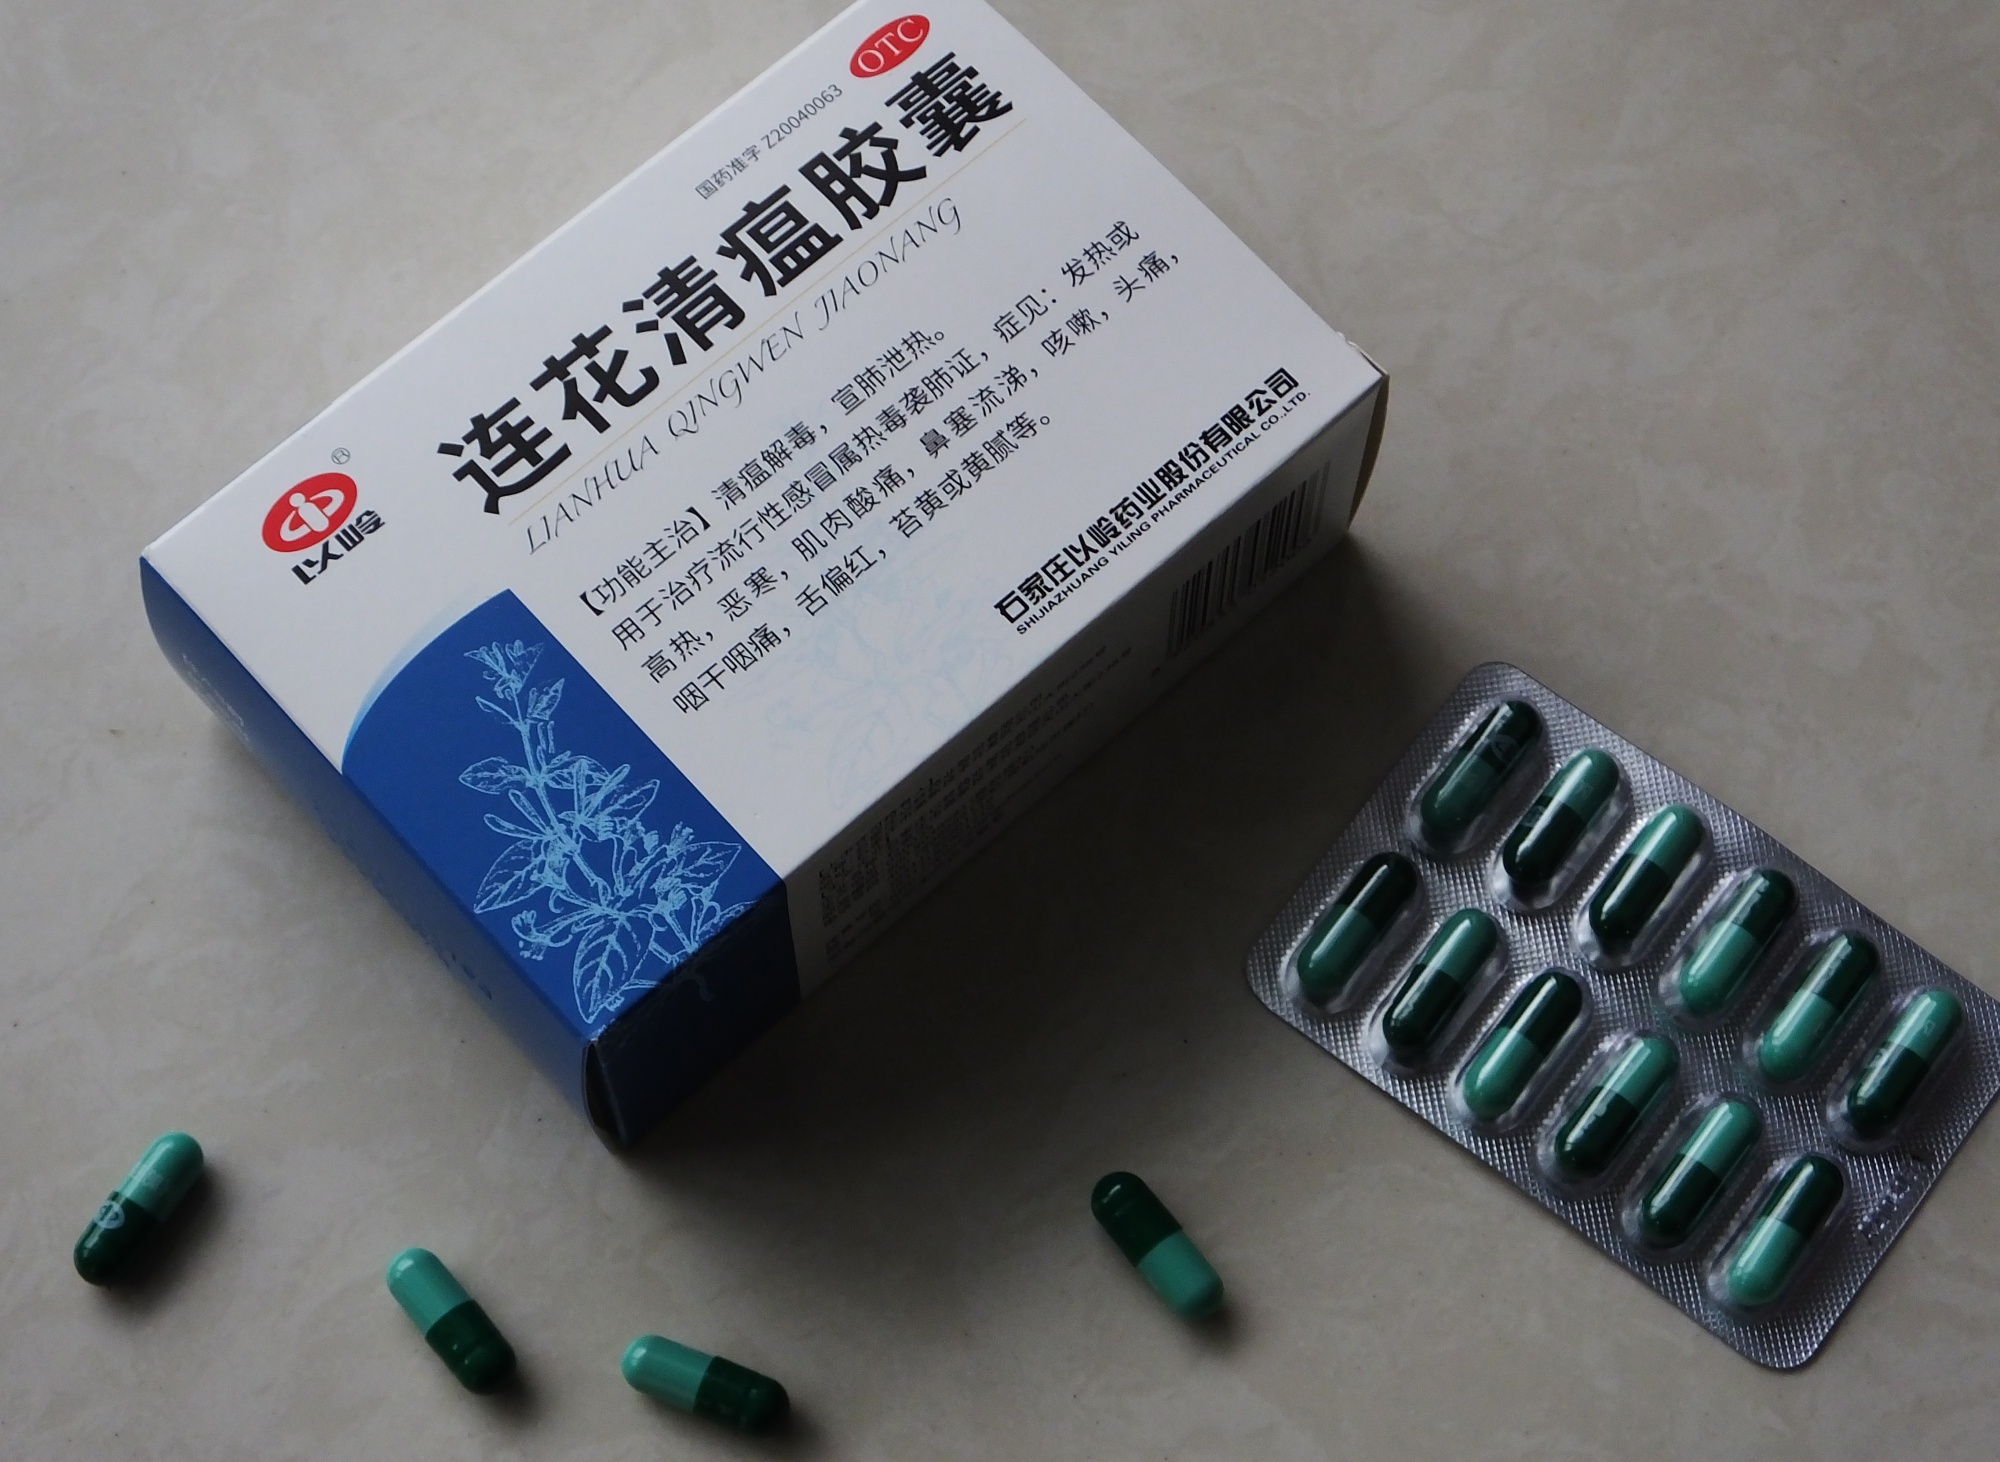 Why You Need This Chinese Cough Syrup